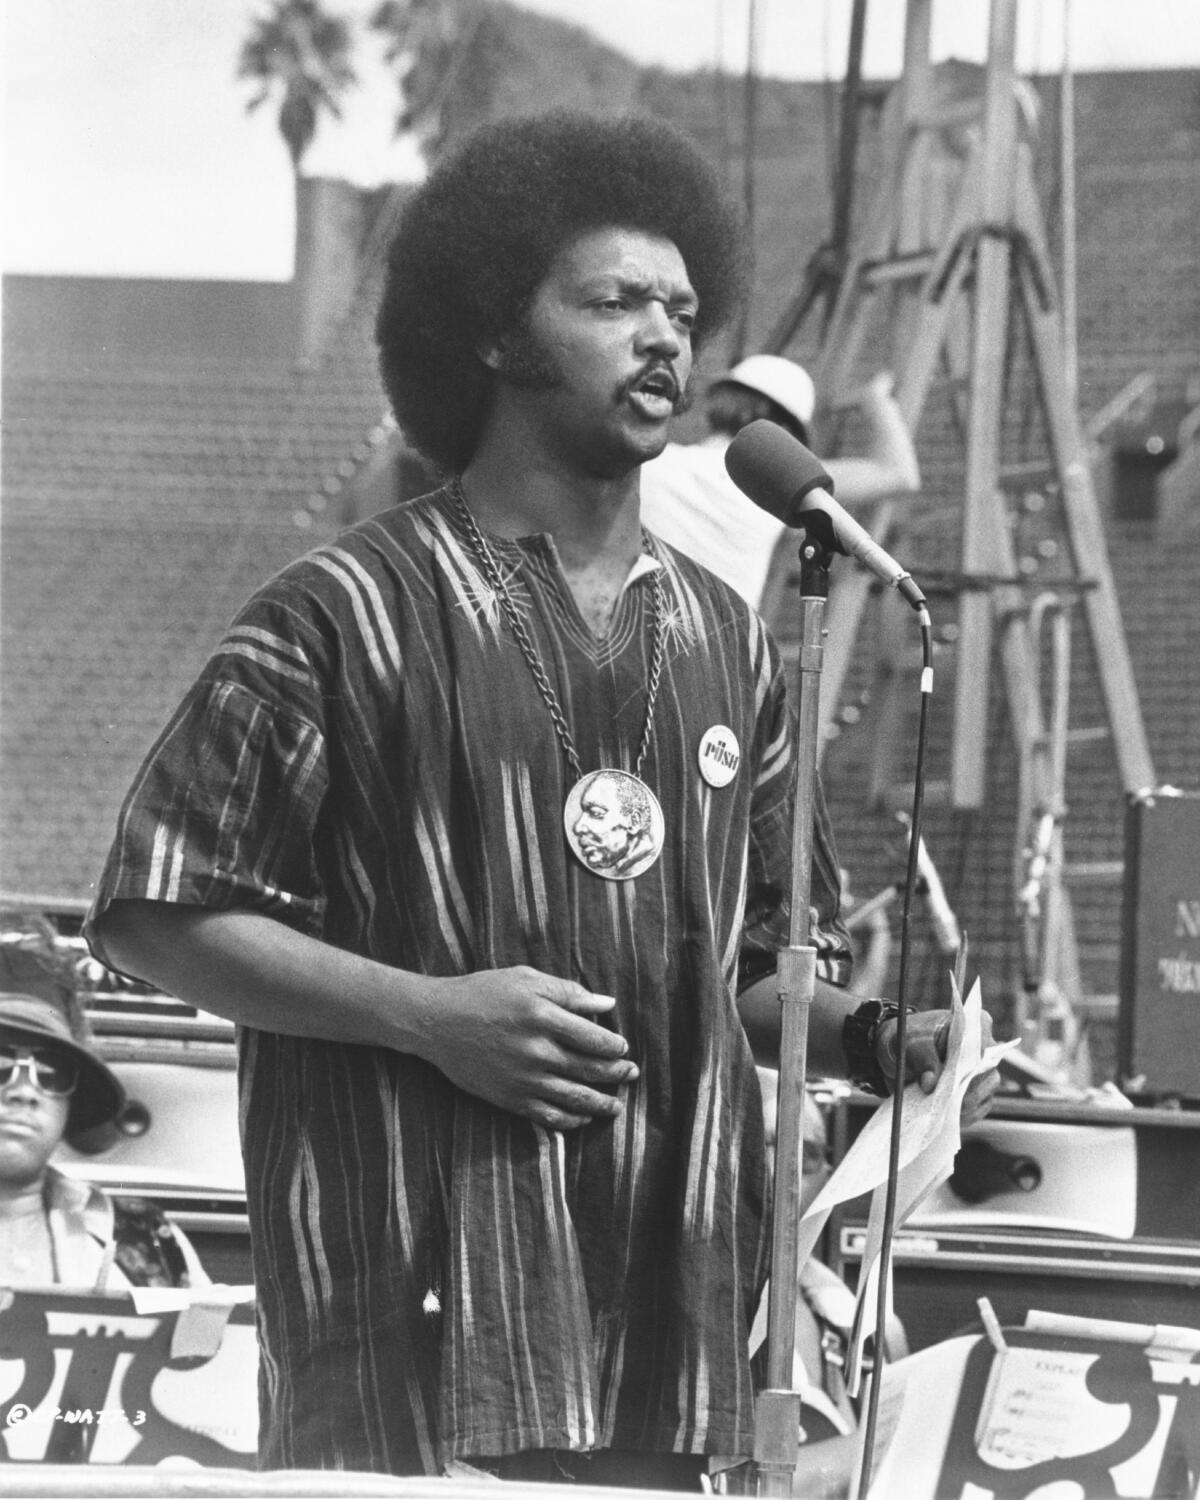 A Black man with an afro, wearing a dashiki and speaking from an outdoor stage